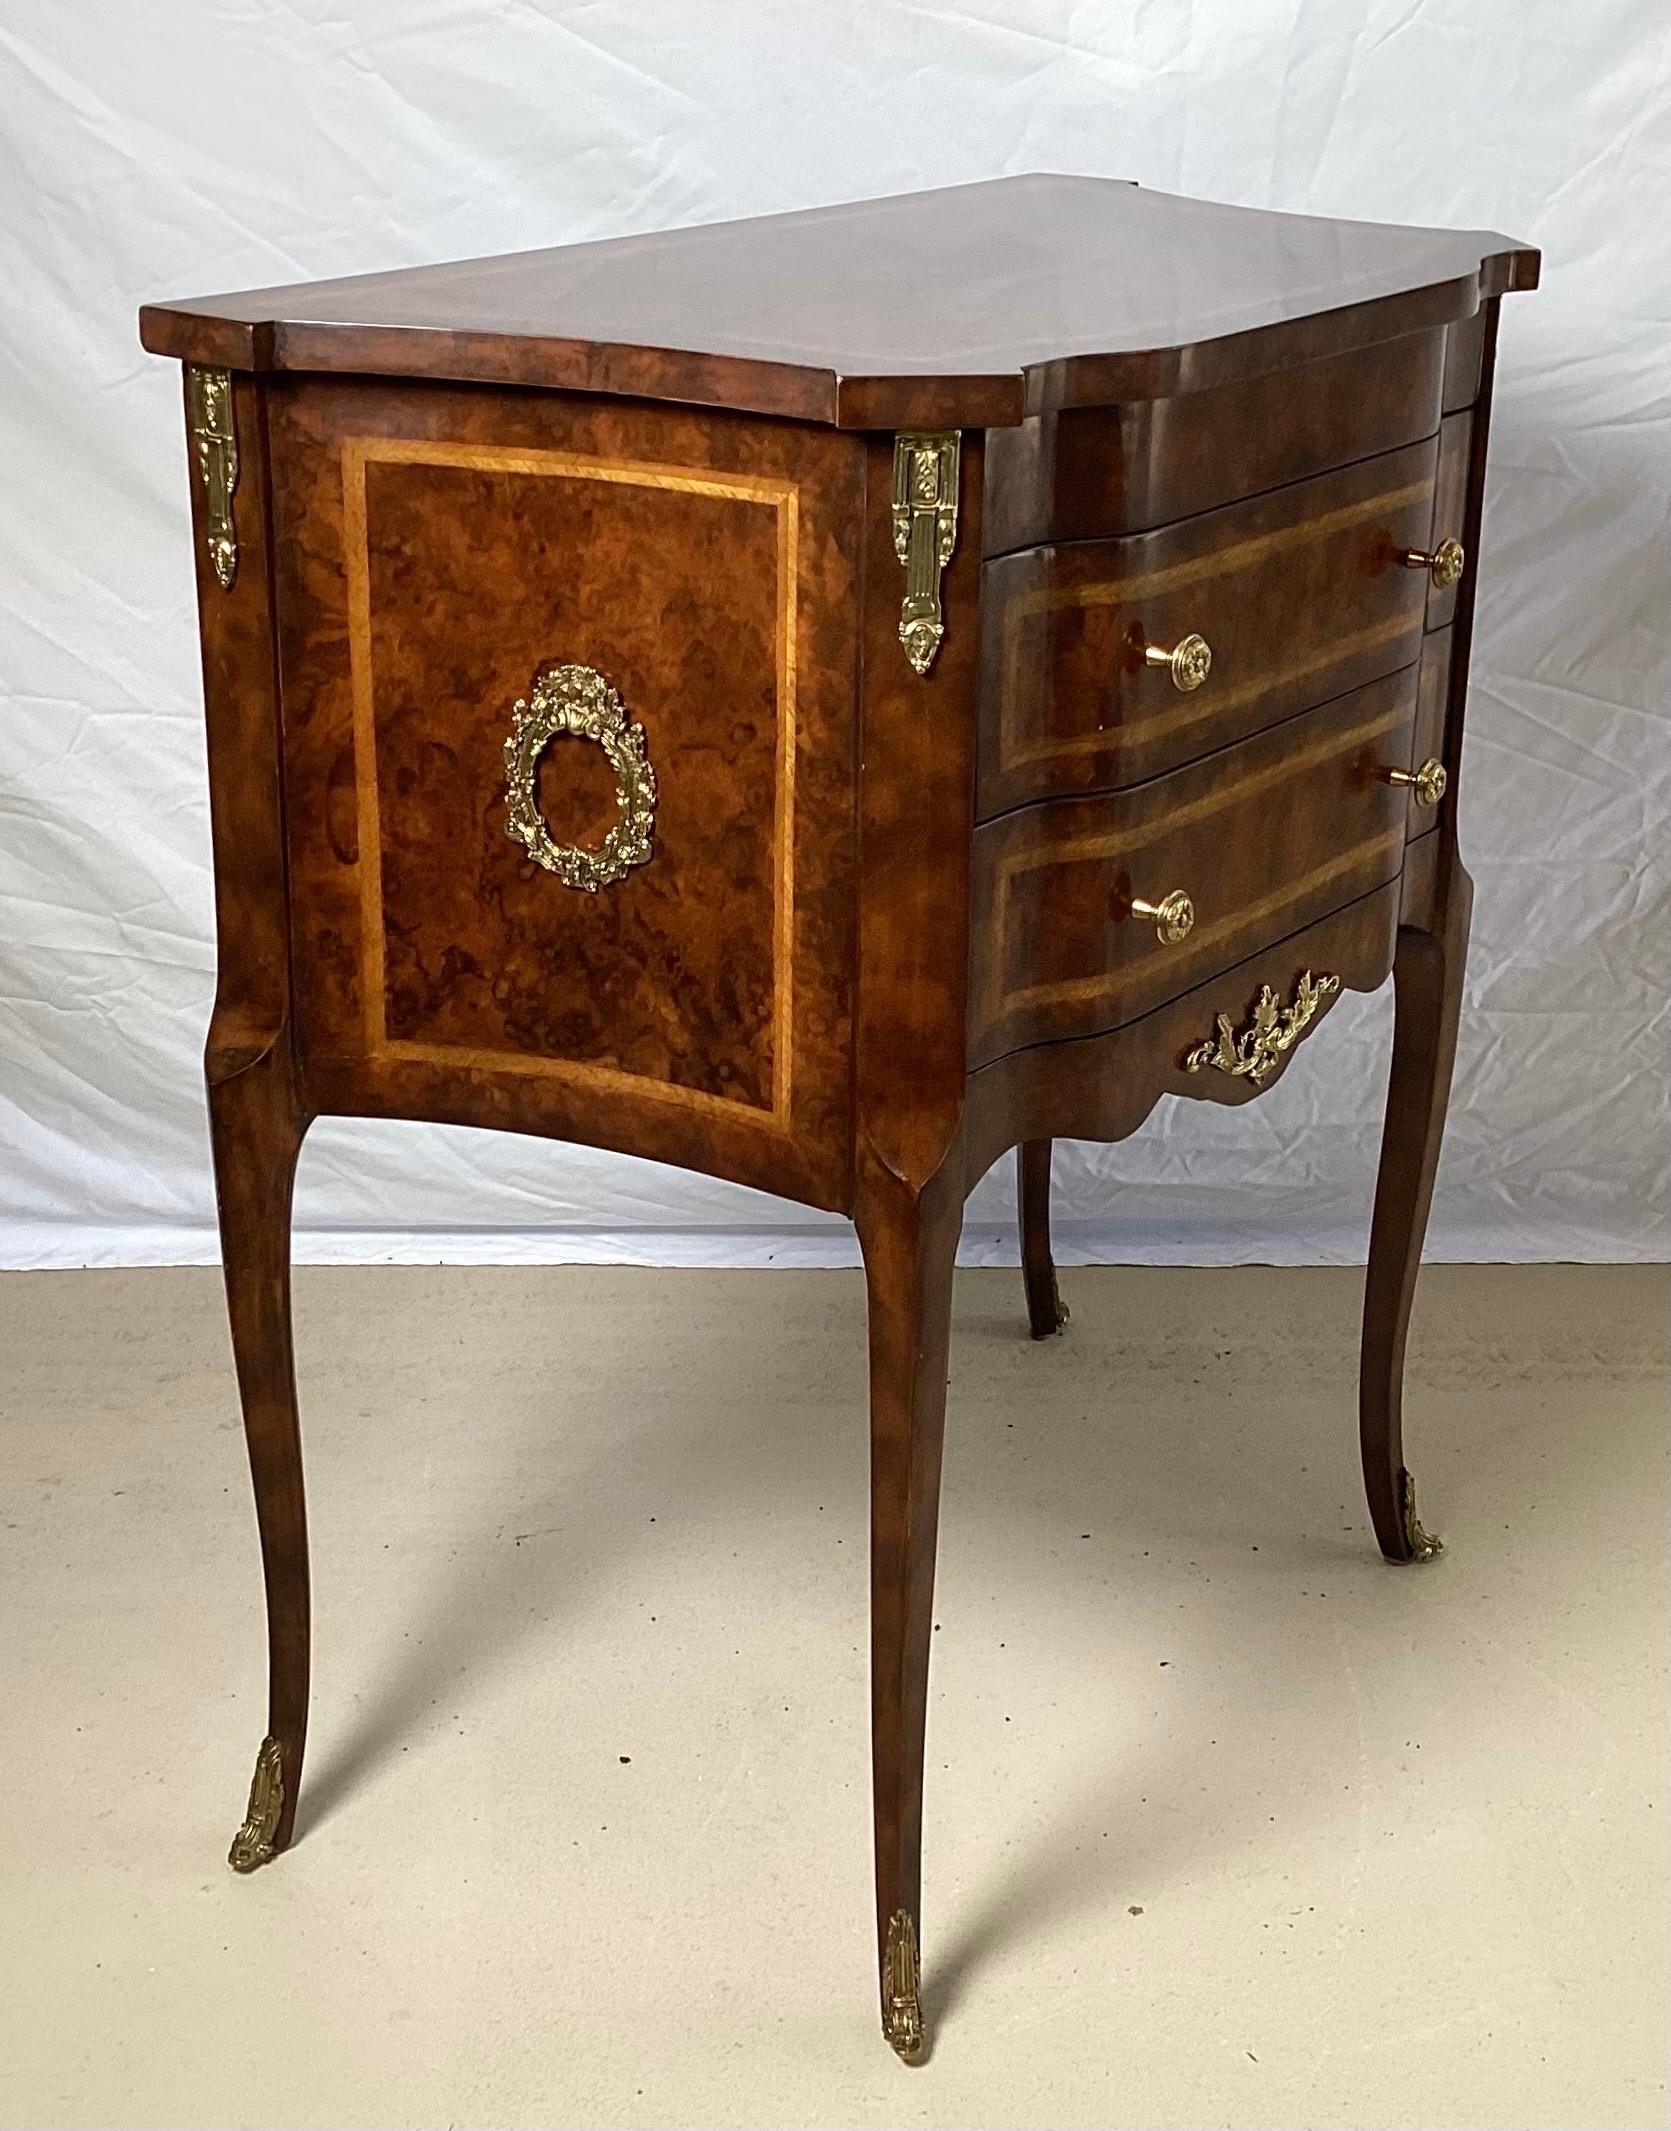 20th Century Diminutive Burl Walnut and Satinwood Two Drawer Commode by Maitland Smith